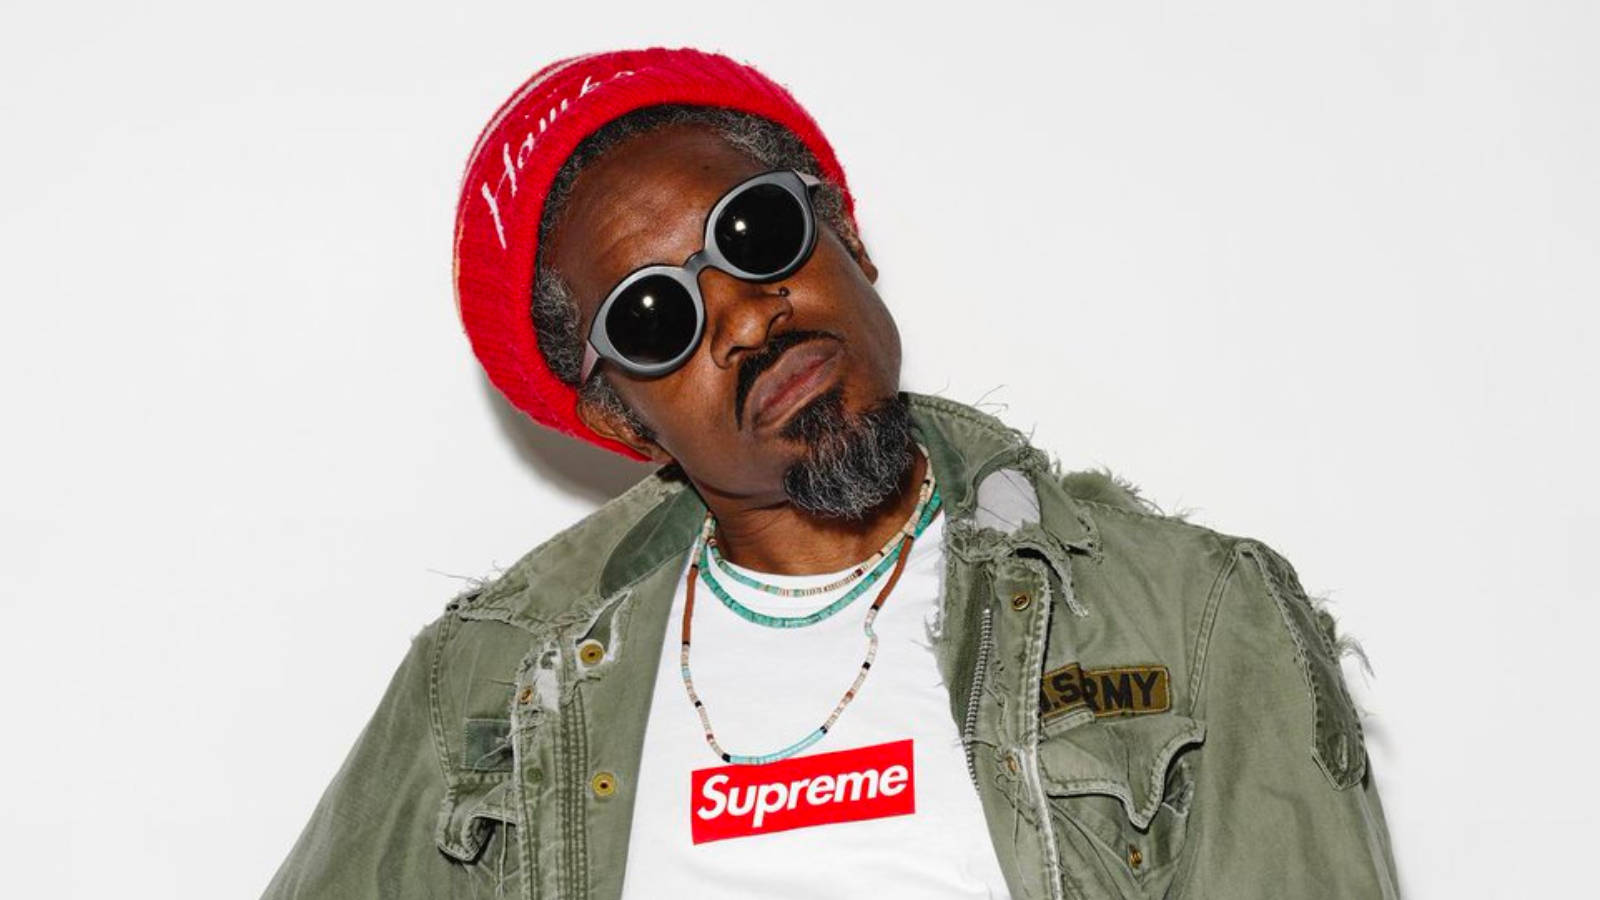 Outkast Andre 3000 Supreme Photoshoot Wallpaper